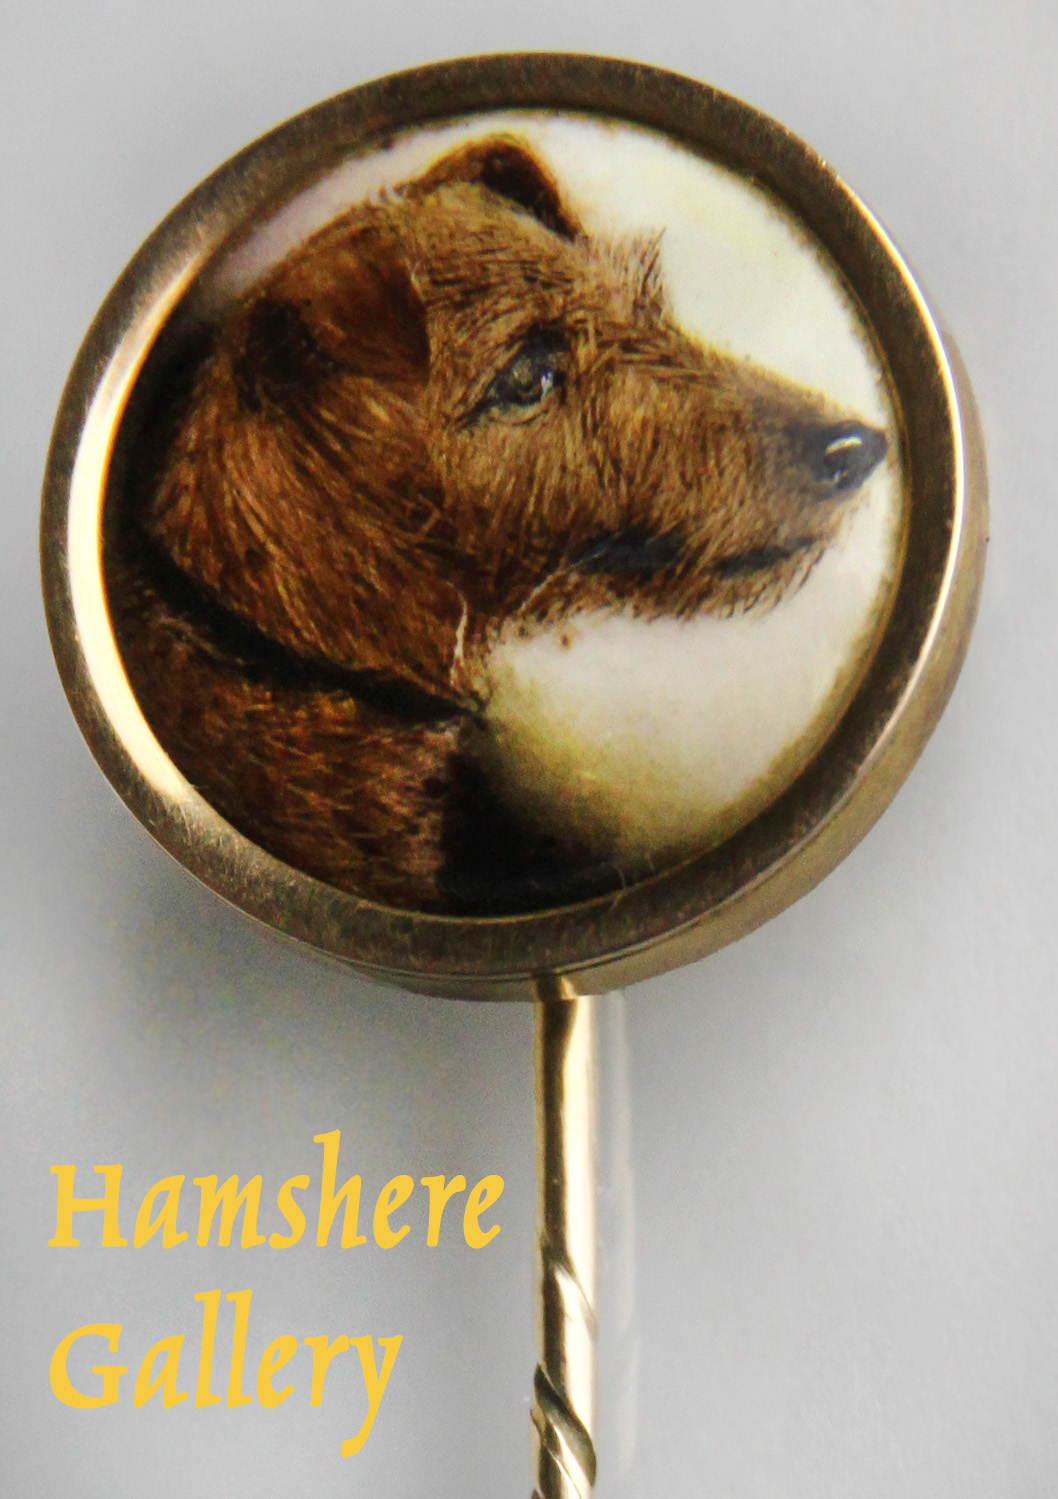 Click to see full size: The Irish Terrier â€œFire-flyerâ€, enamel stick pin by John William Bailey (English, 1831 â€“ 1914)- The Irish Terrier â€œFire-flyerâ€, enamel stick pin by John William Bailey (English, 1831 â€“ 1914)